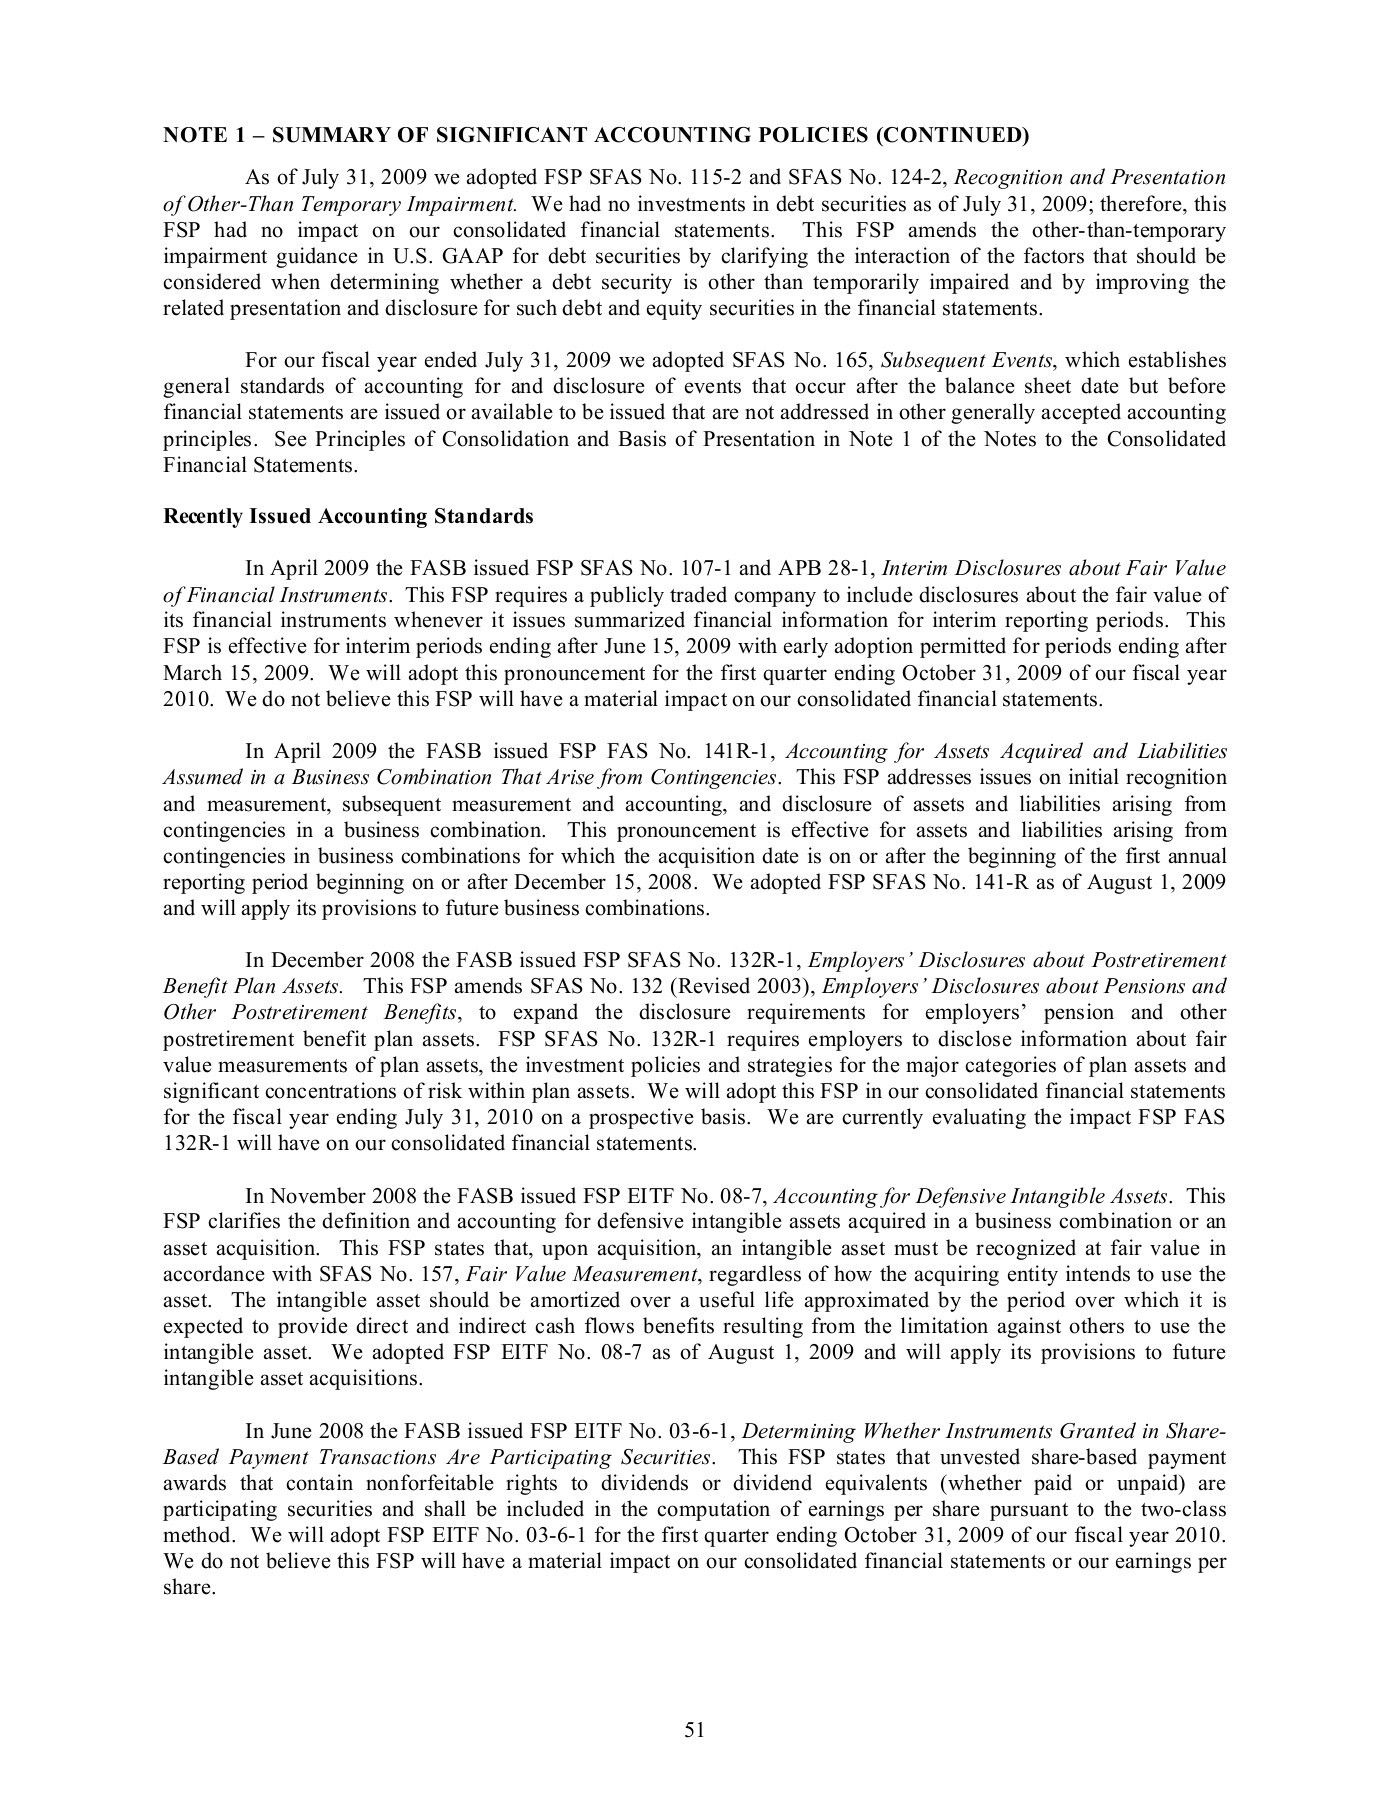 10 Annual Report Cover Letter Sample | Cover Letter Within Summary Annual Report Template